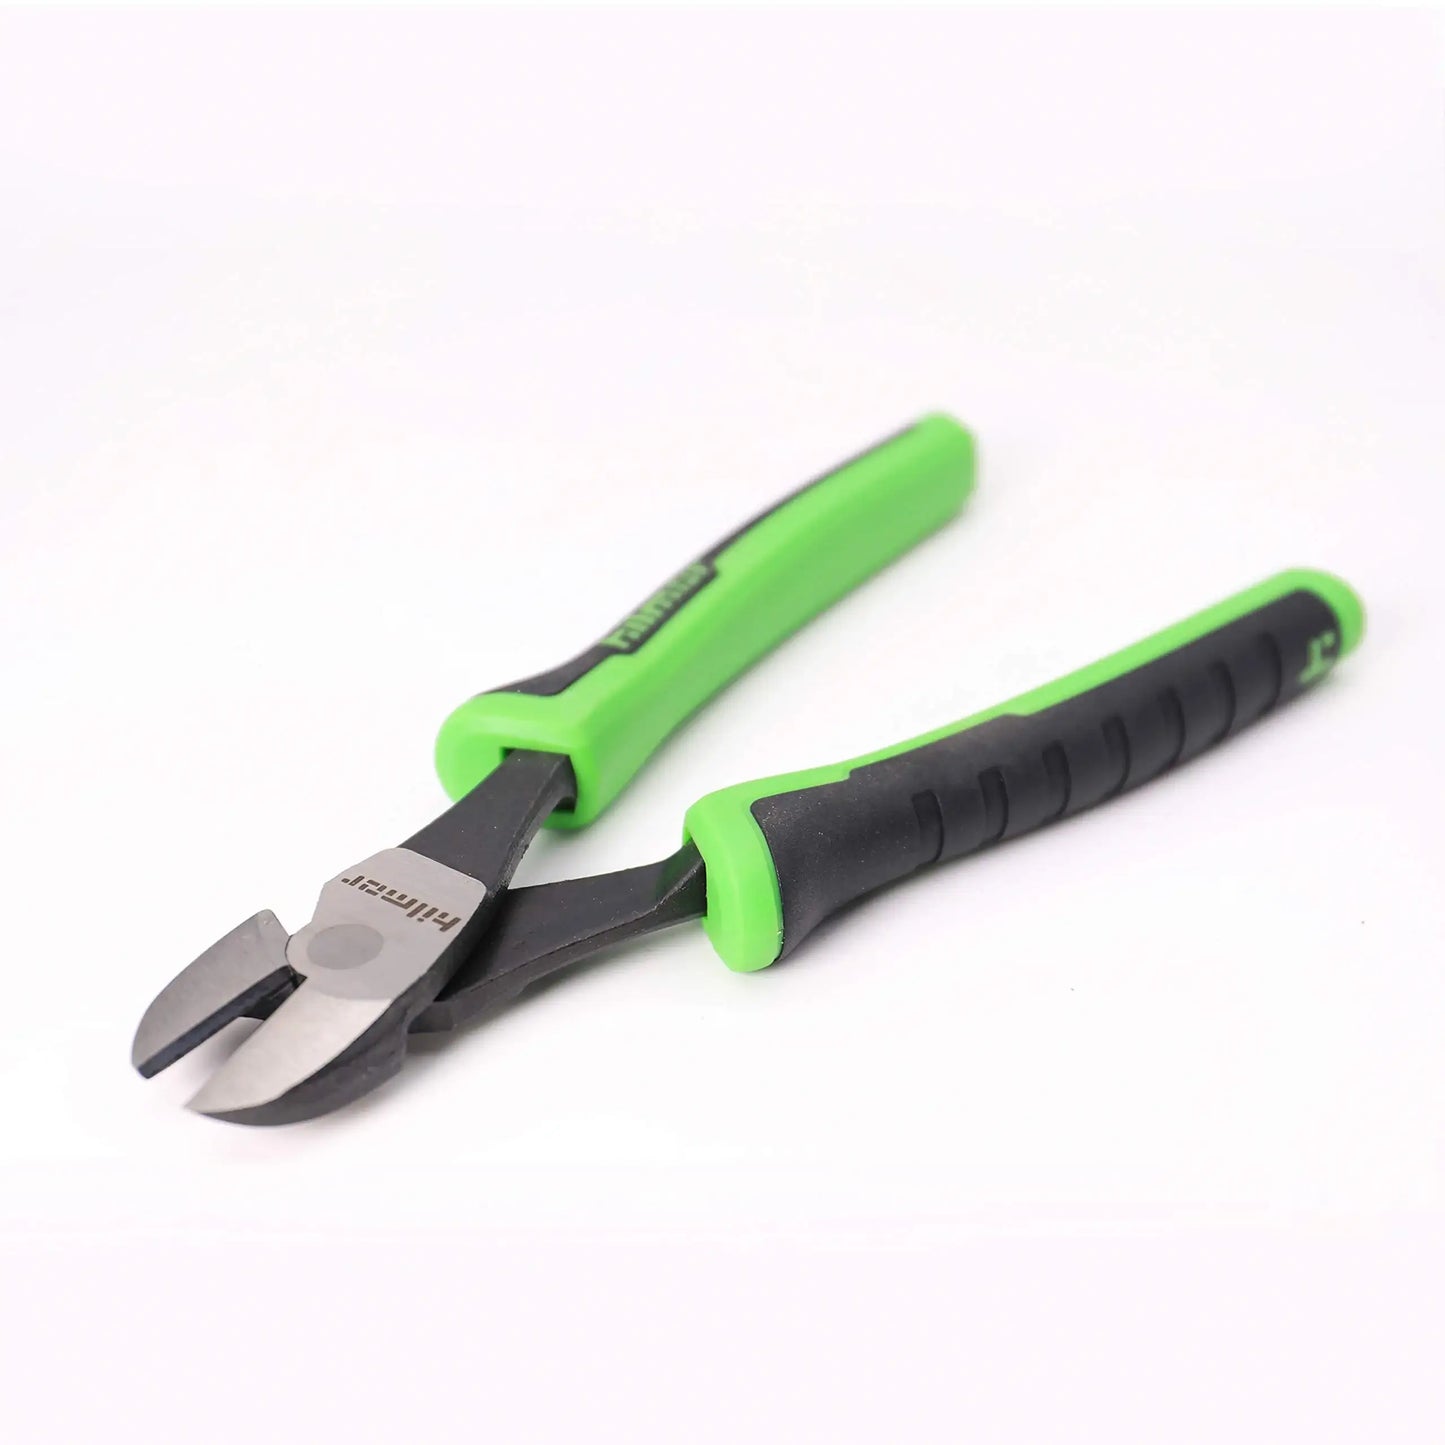 Hilmor 8 Diagonal Cutting Plier with Rubber Handle Grip, Black & Green, DCP8 1885363 Fourth